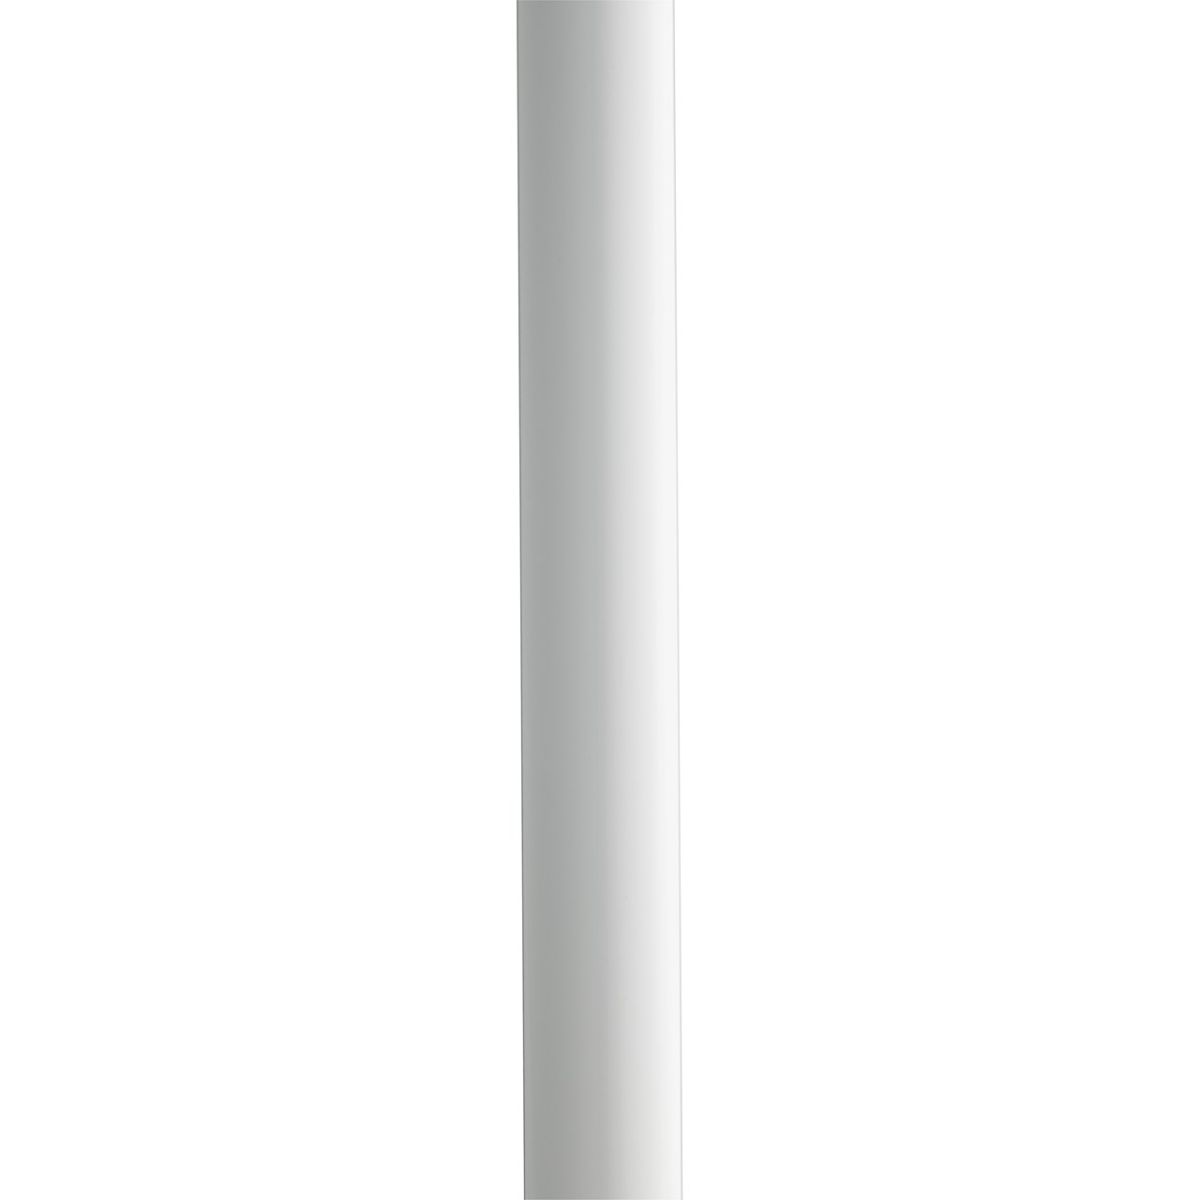 7 Feet Round Aluminum Direct Burial Pole With Ladder Rest 3 In. Shaft White finish